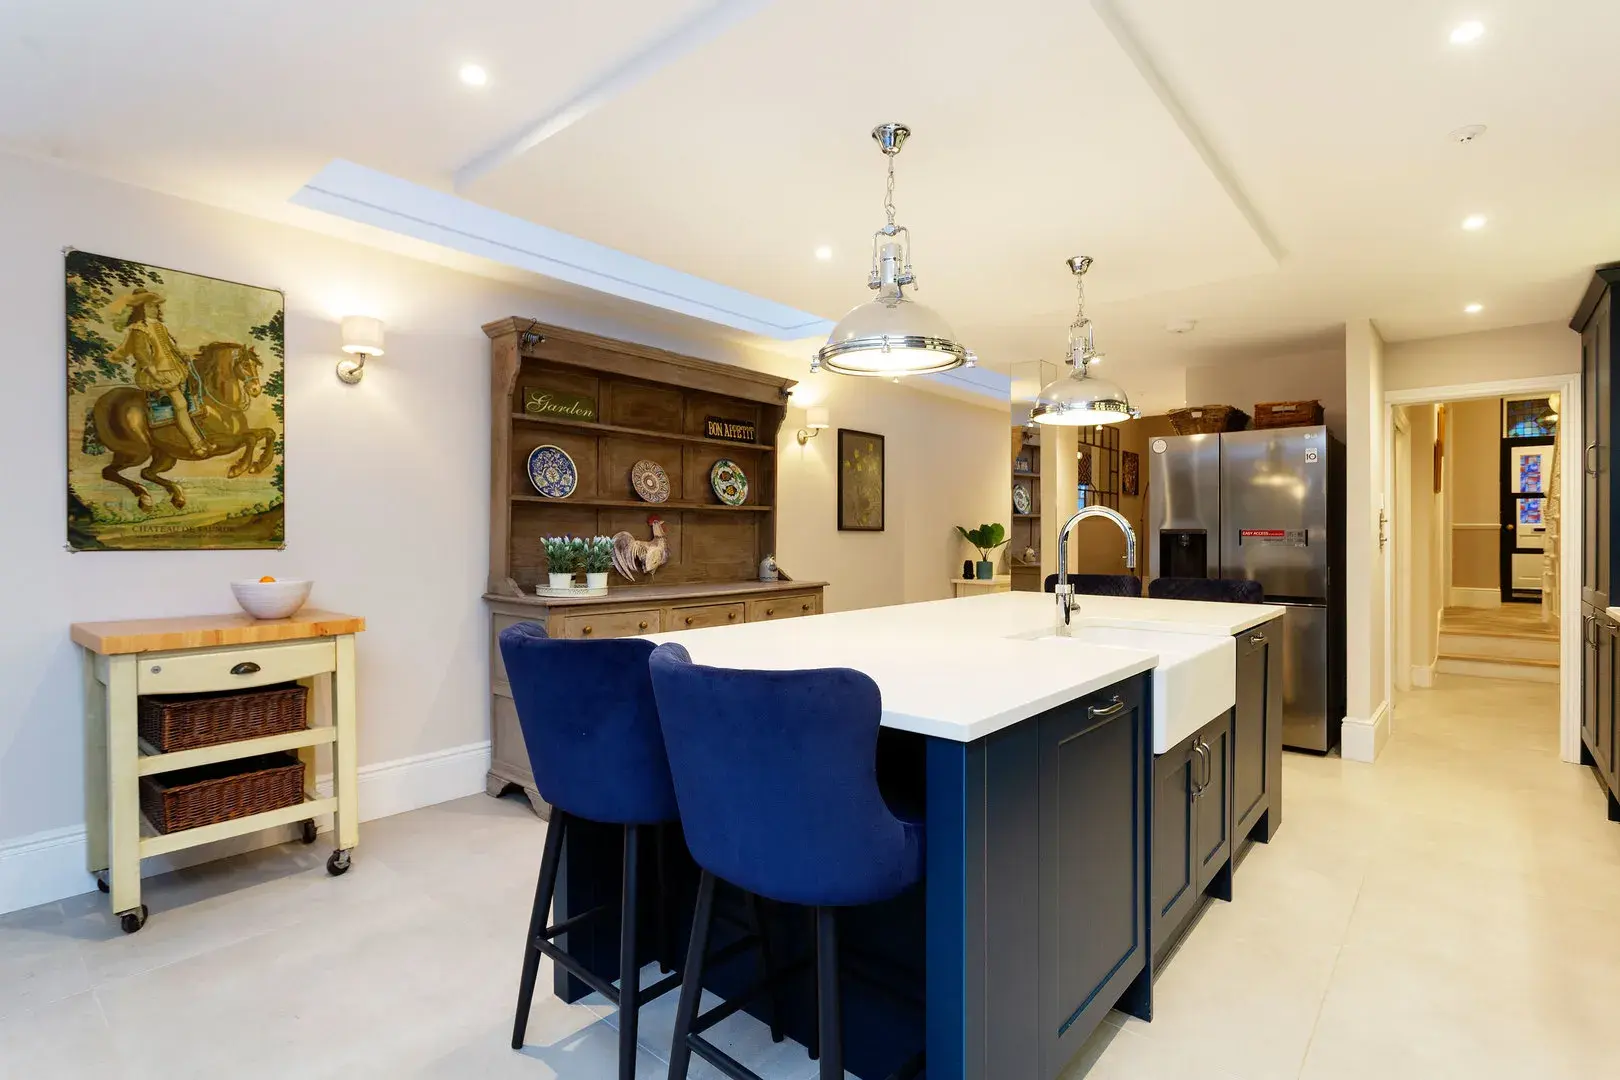 Caldervale Road, holiday home in Clapham, London